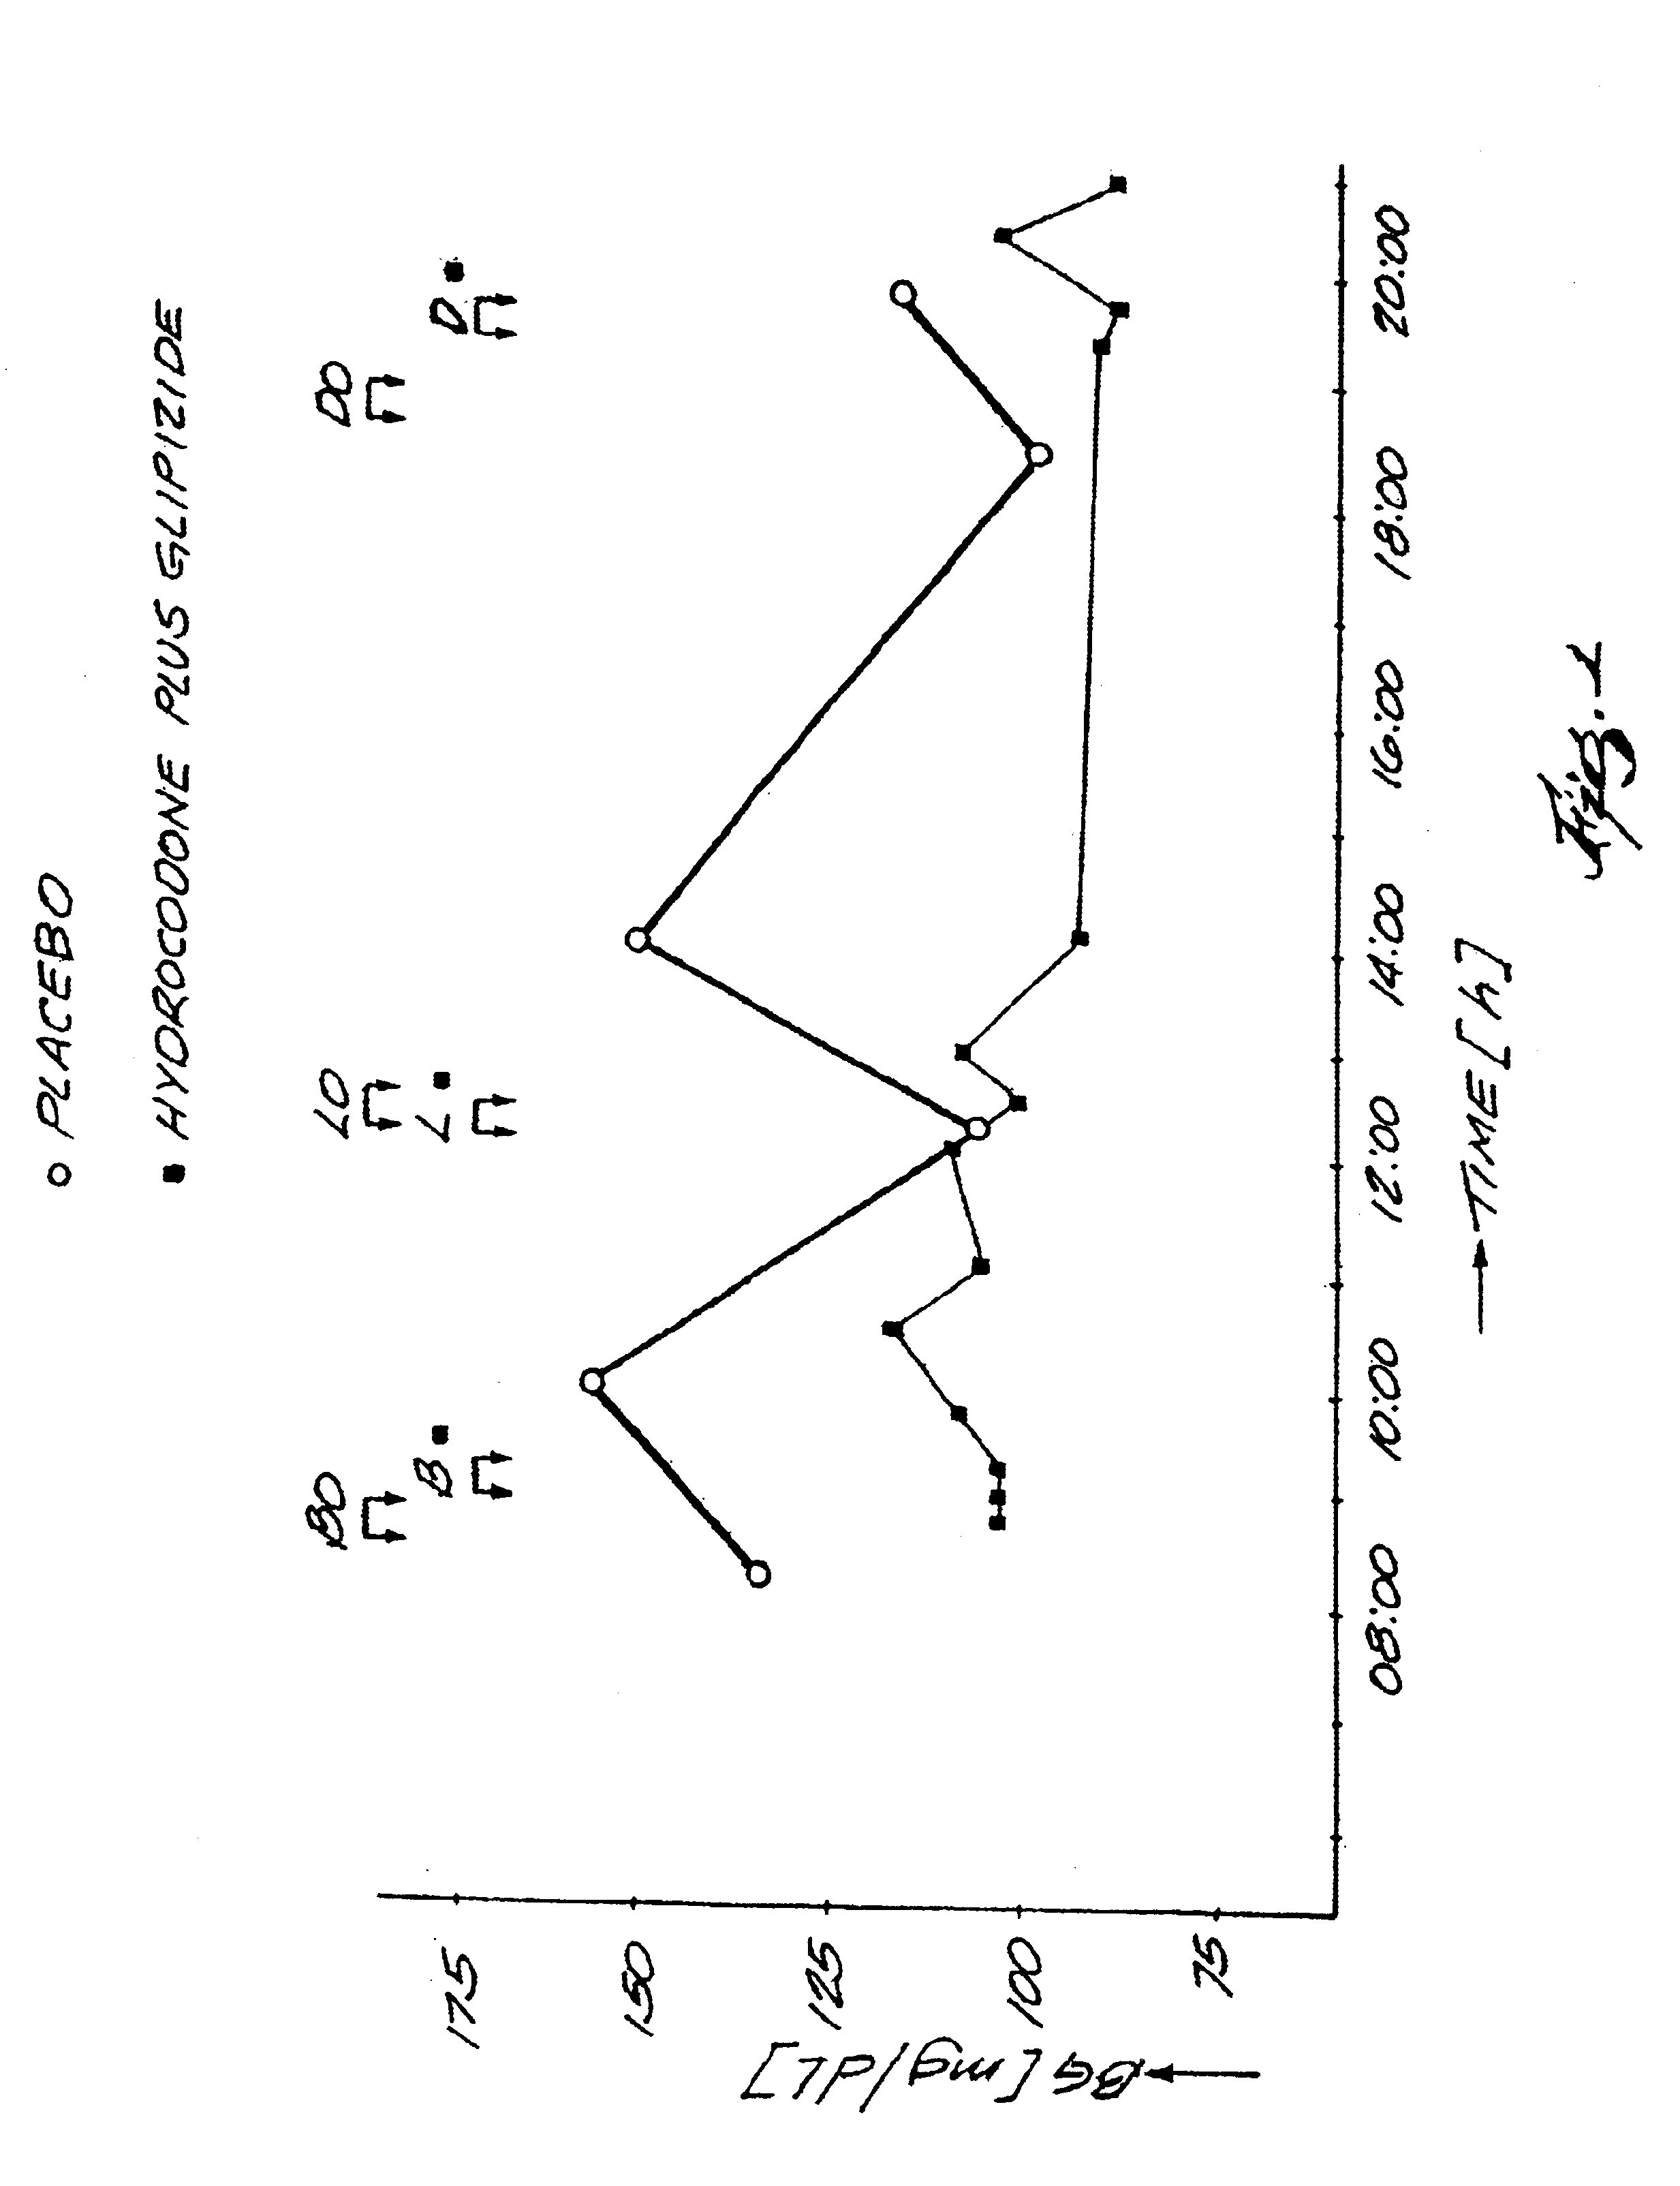 Method of treating the syndrome of lipodystrophy